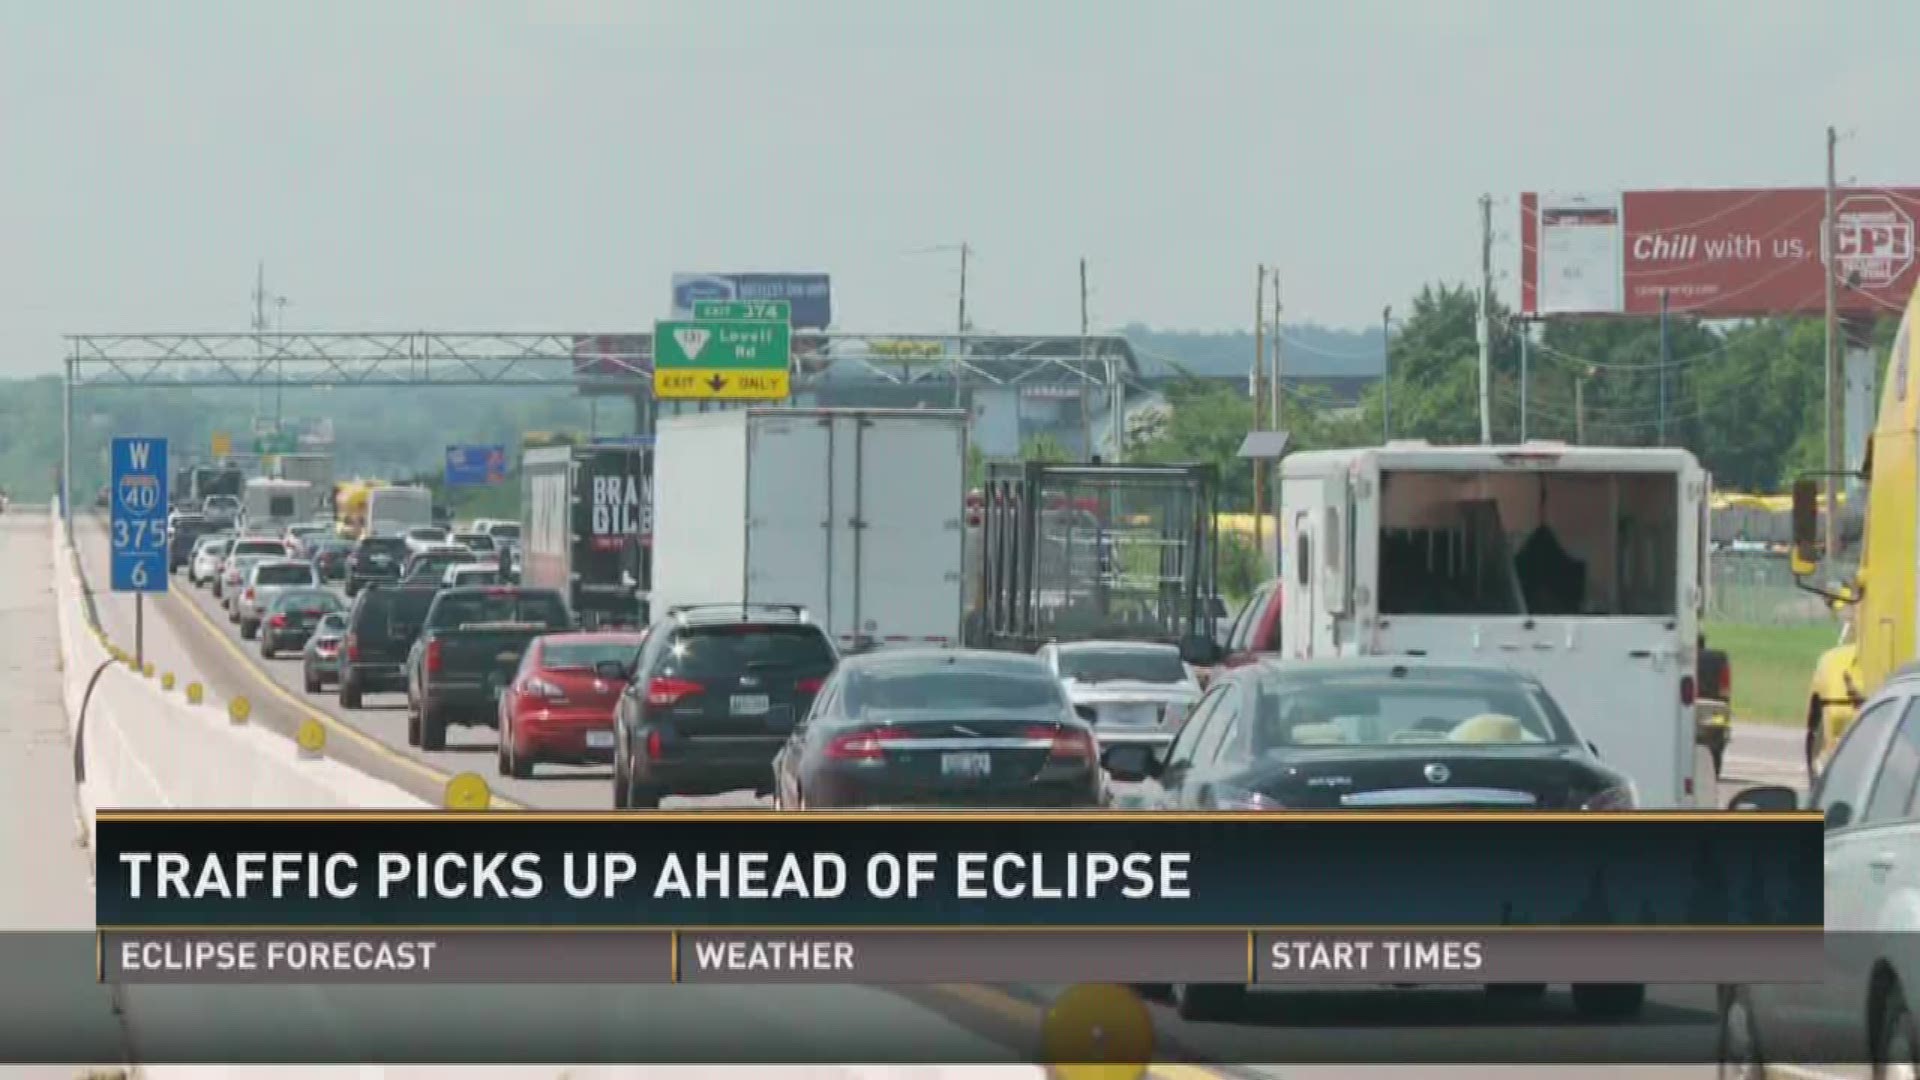 Parts of I-40 West, I-75 South were backed up for much of Sunday afternoon as drivers left Knox County, heading towards the path of totality.